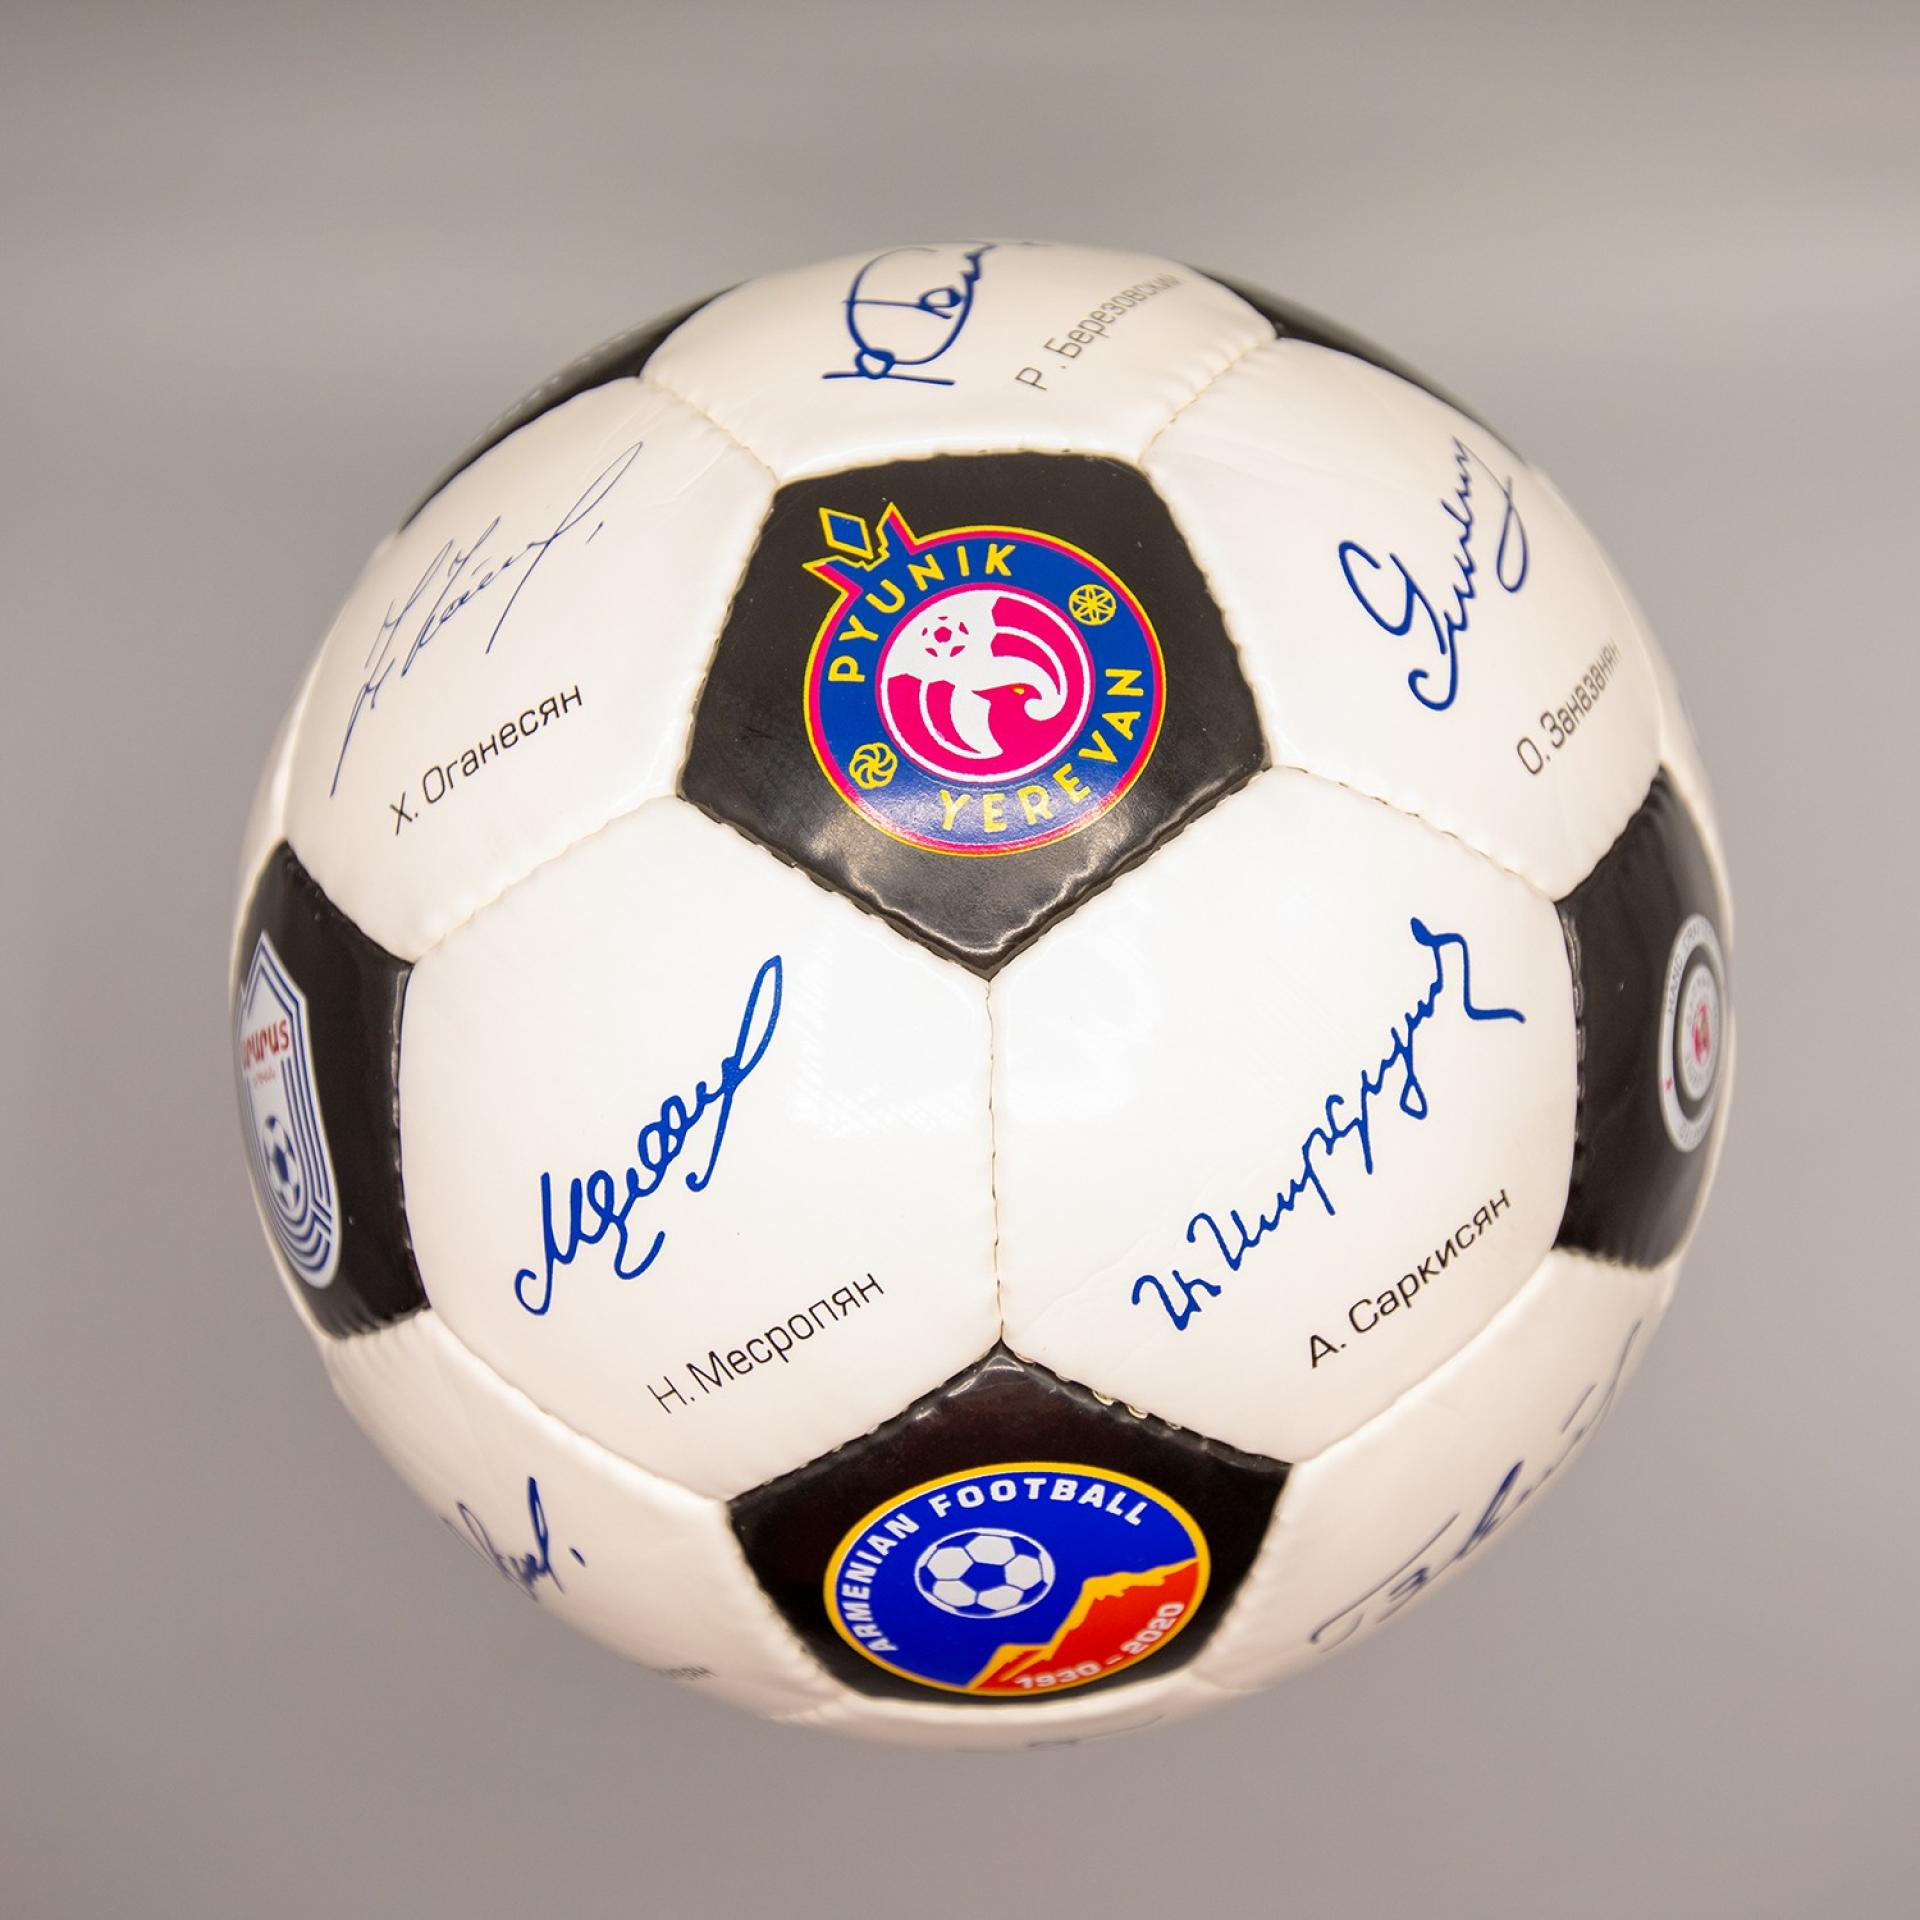 Ball with signatures